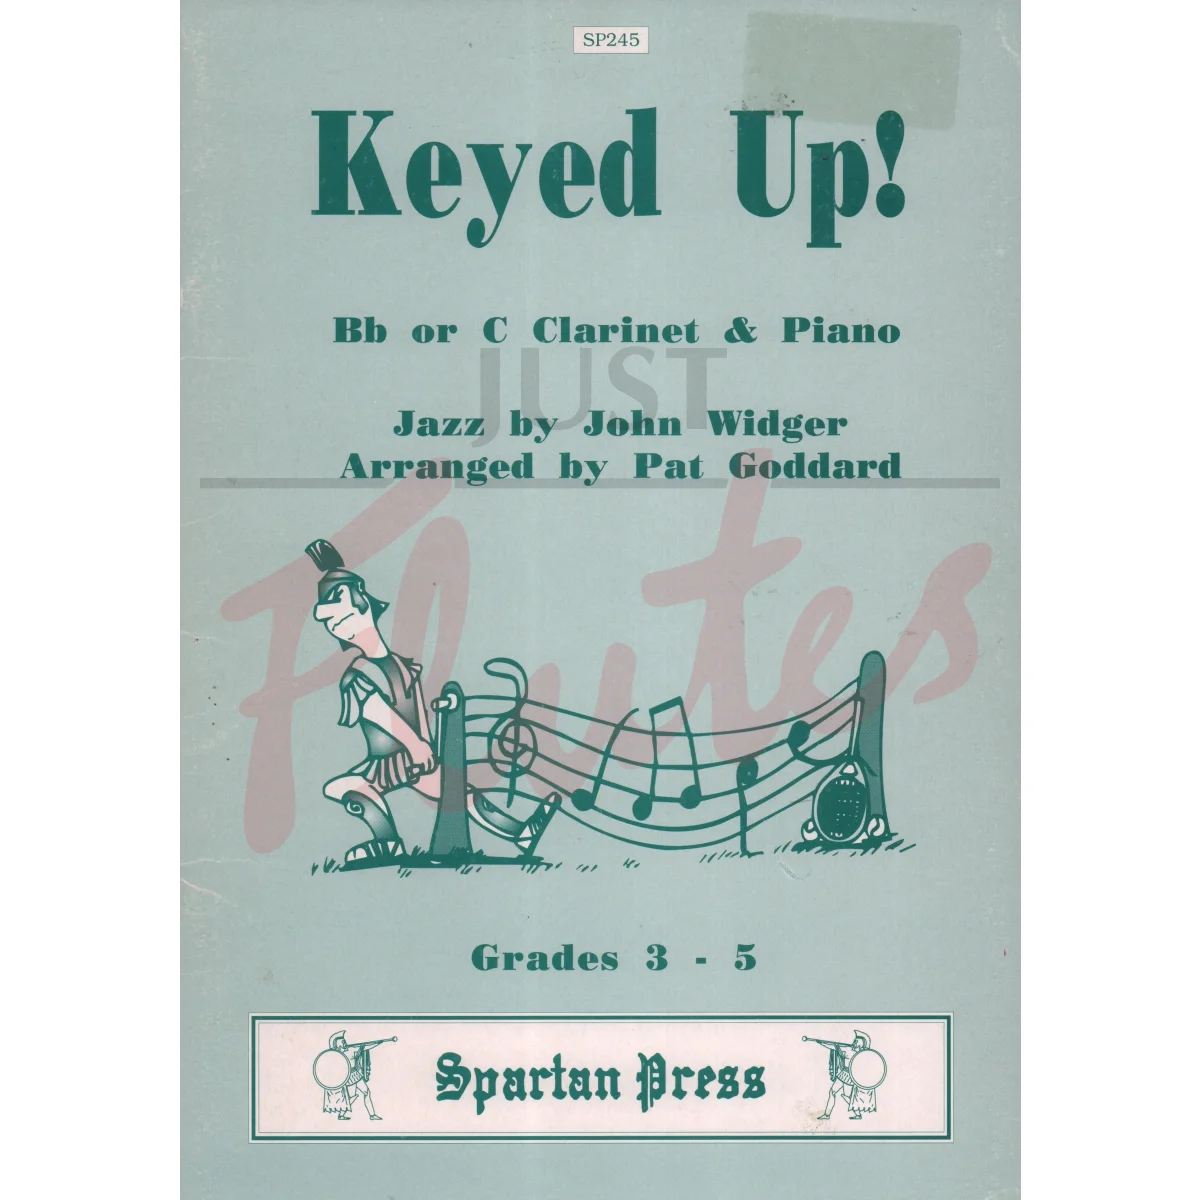 Keyed Up! for Bb or C Clarinet and Piano